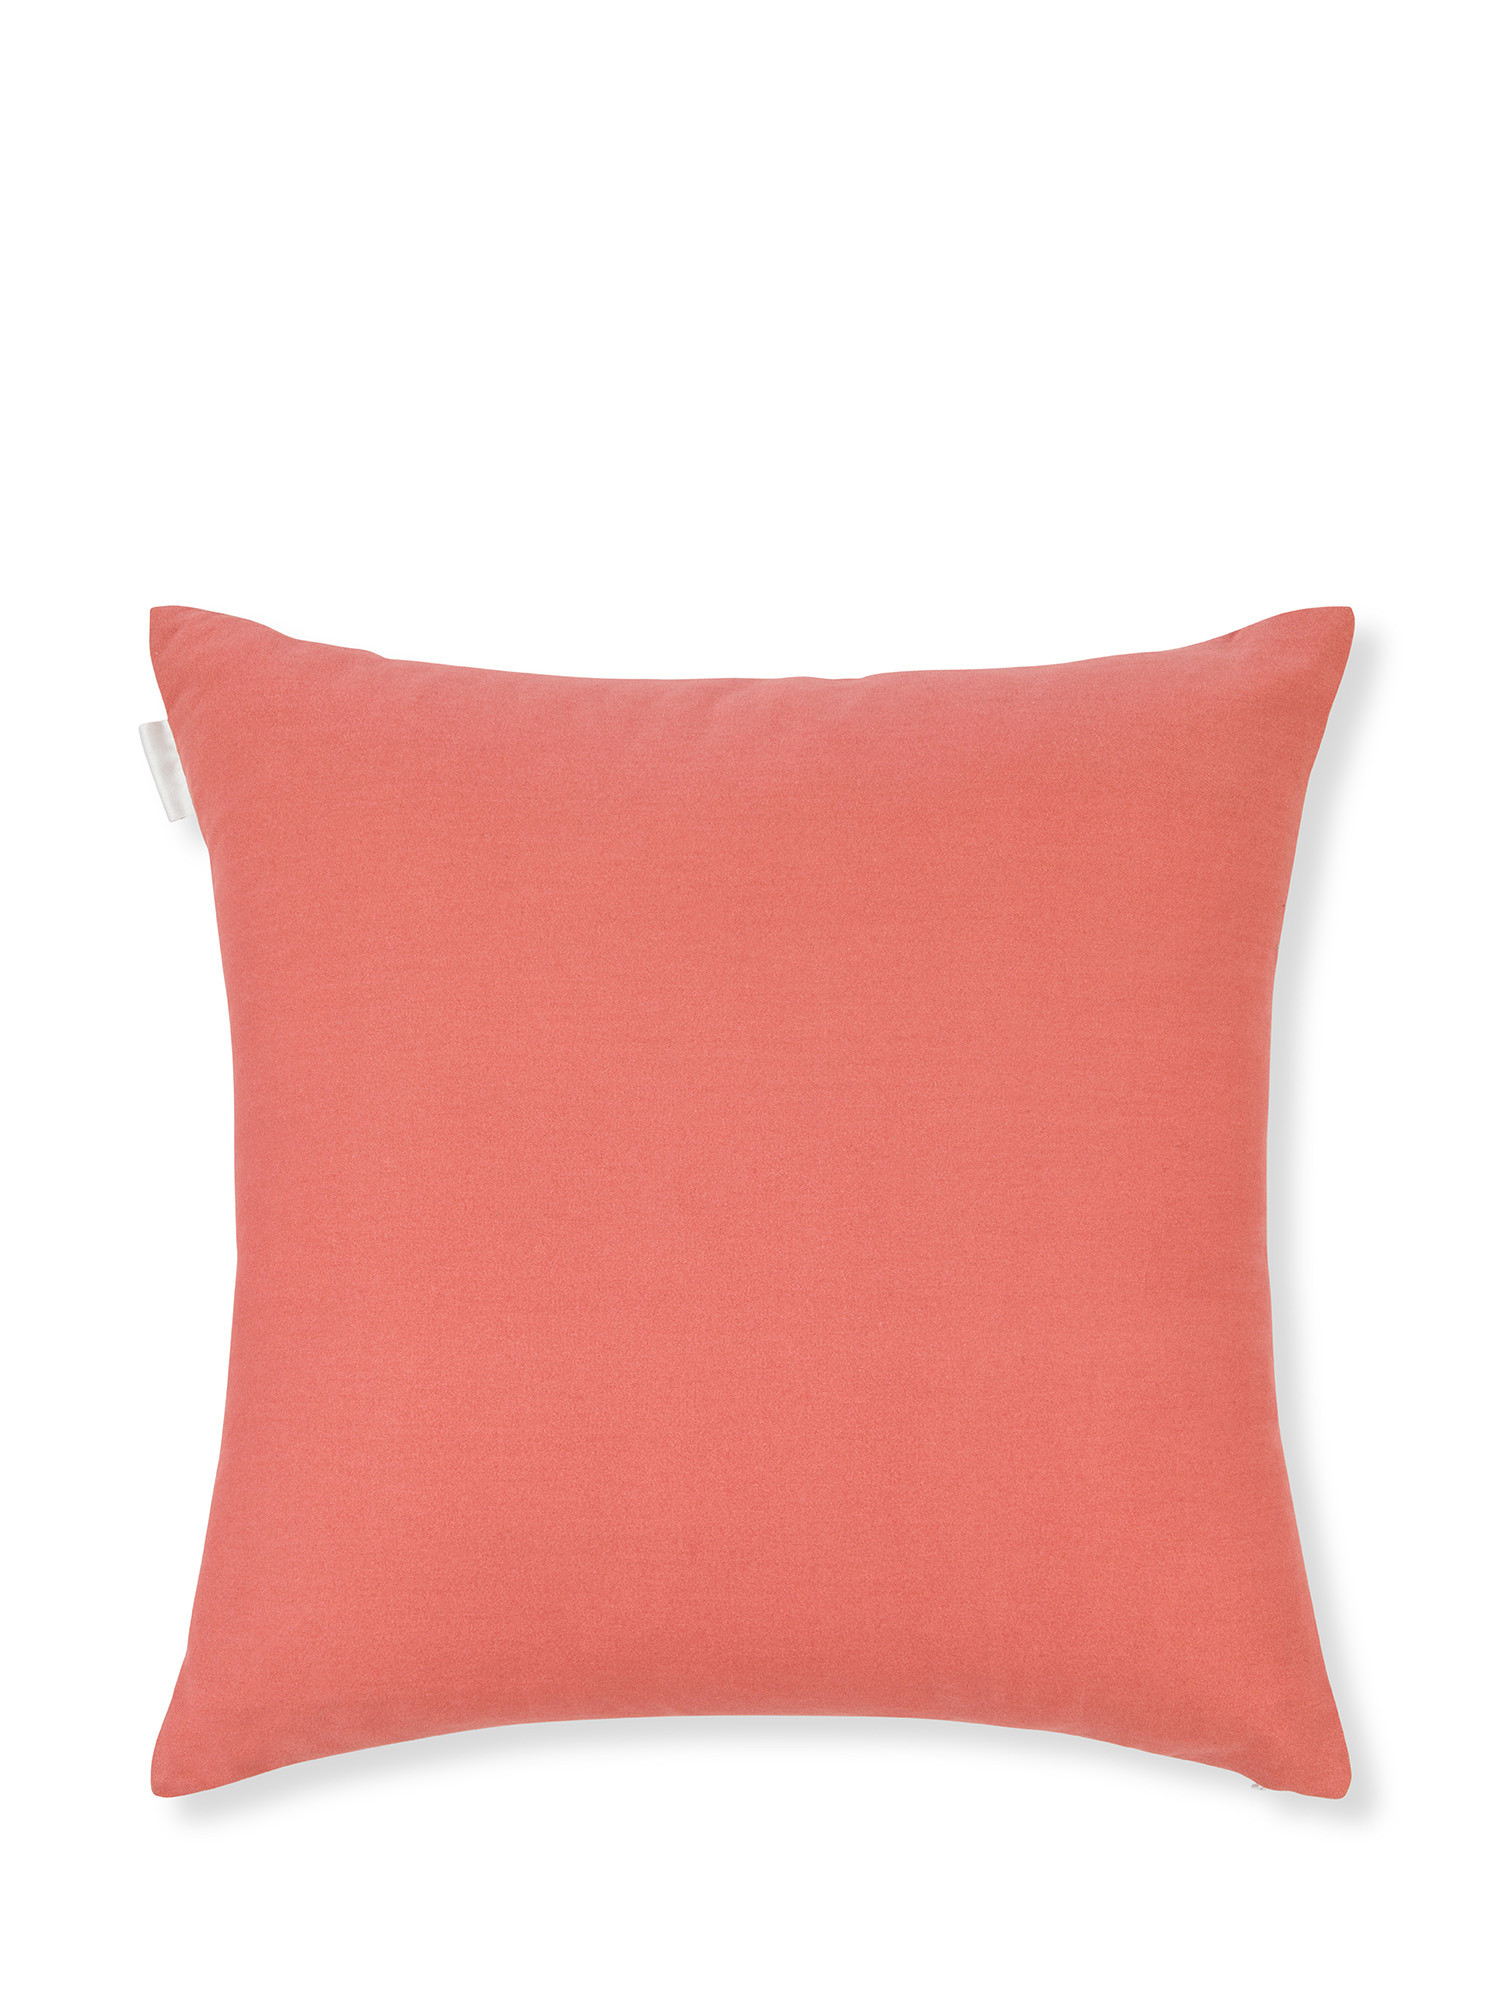 Cotton twill cushion with stitching 45x45cm, Light Pink, large image number 1